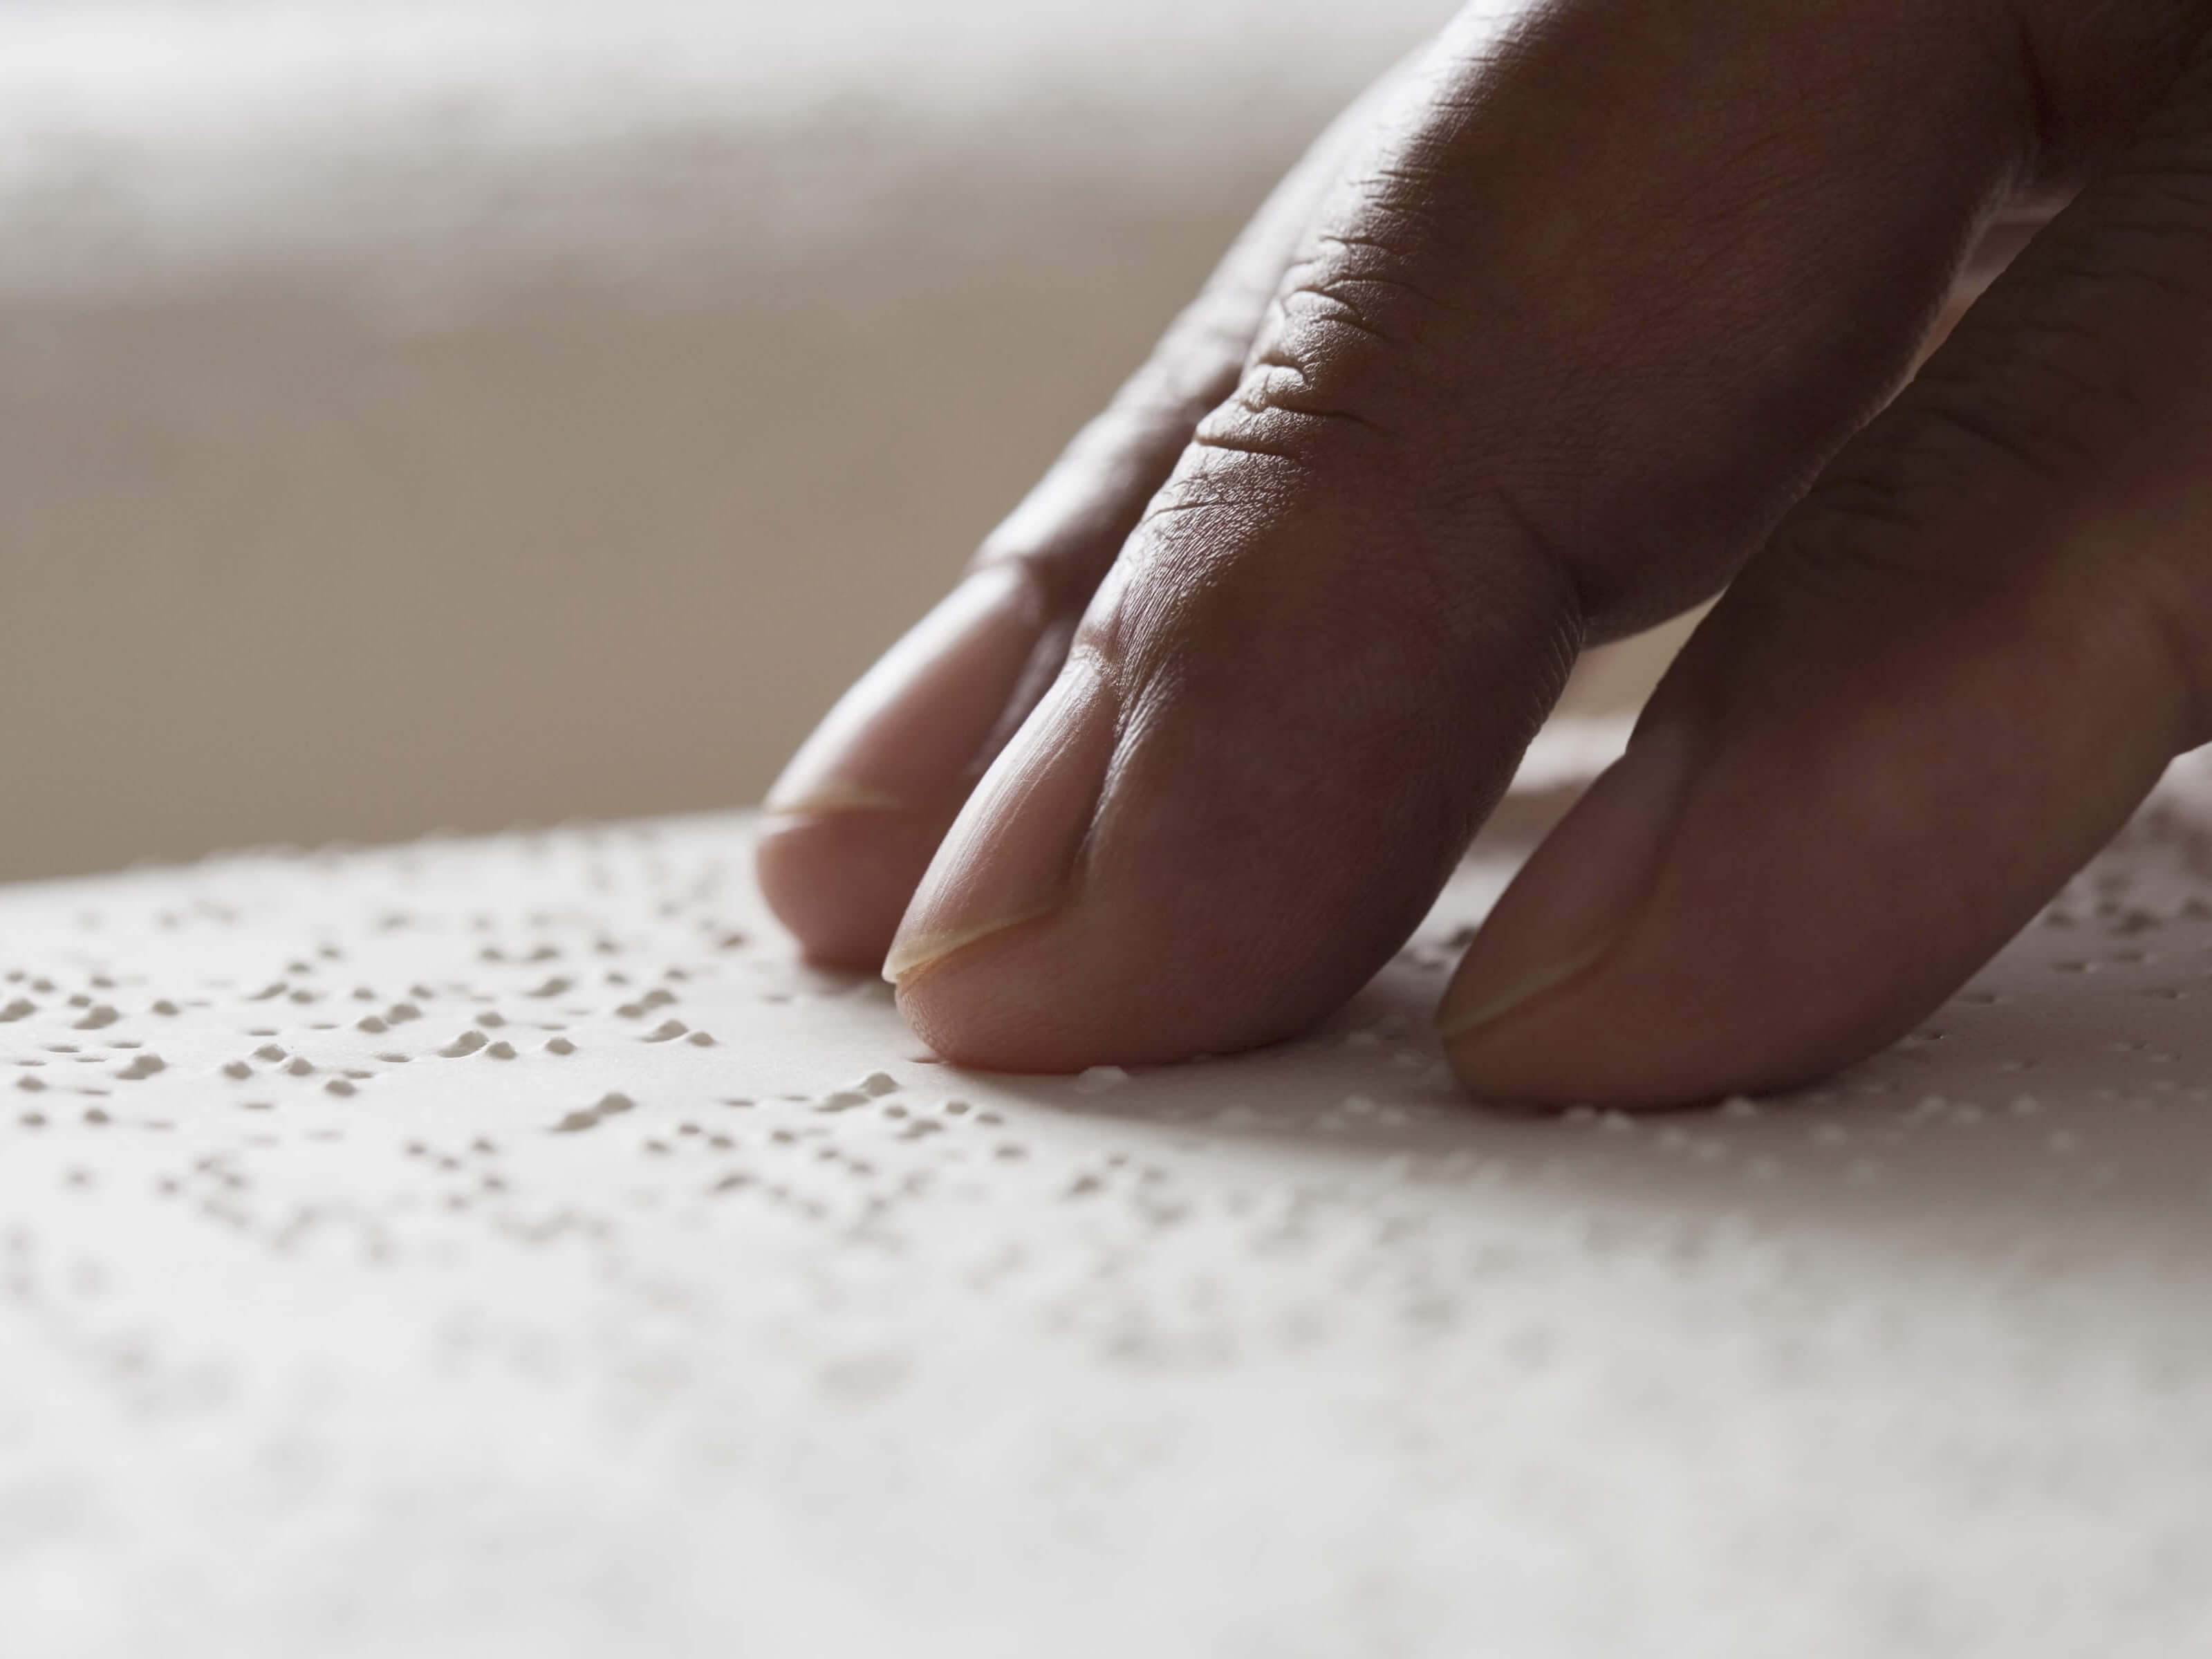 A hand rests on a sheet of braille.